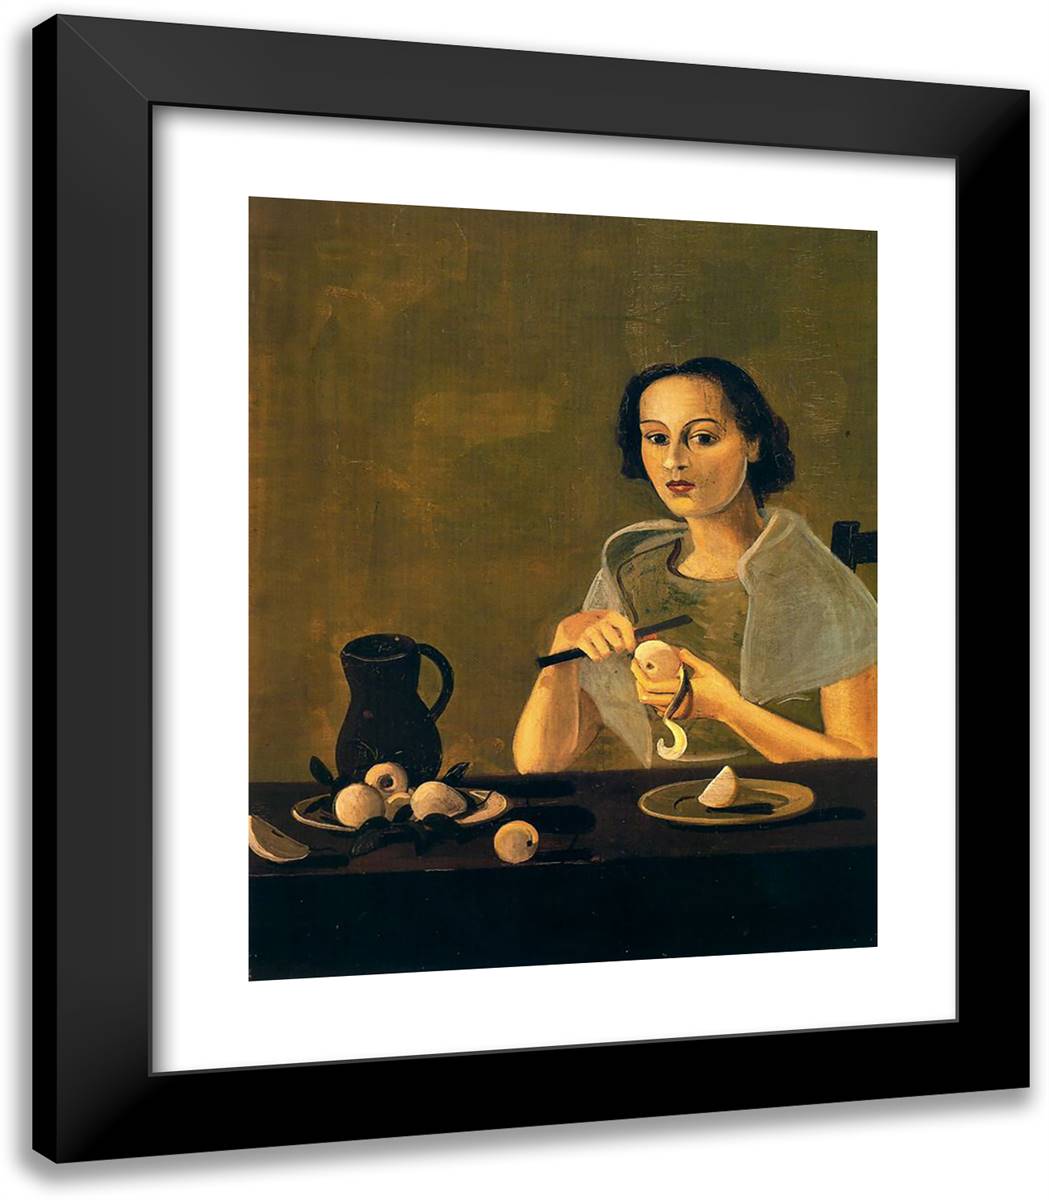 The Girl Cutting Apple 20x23 Black Modern Wood Framed Art Print Poster by Derain, Andre